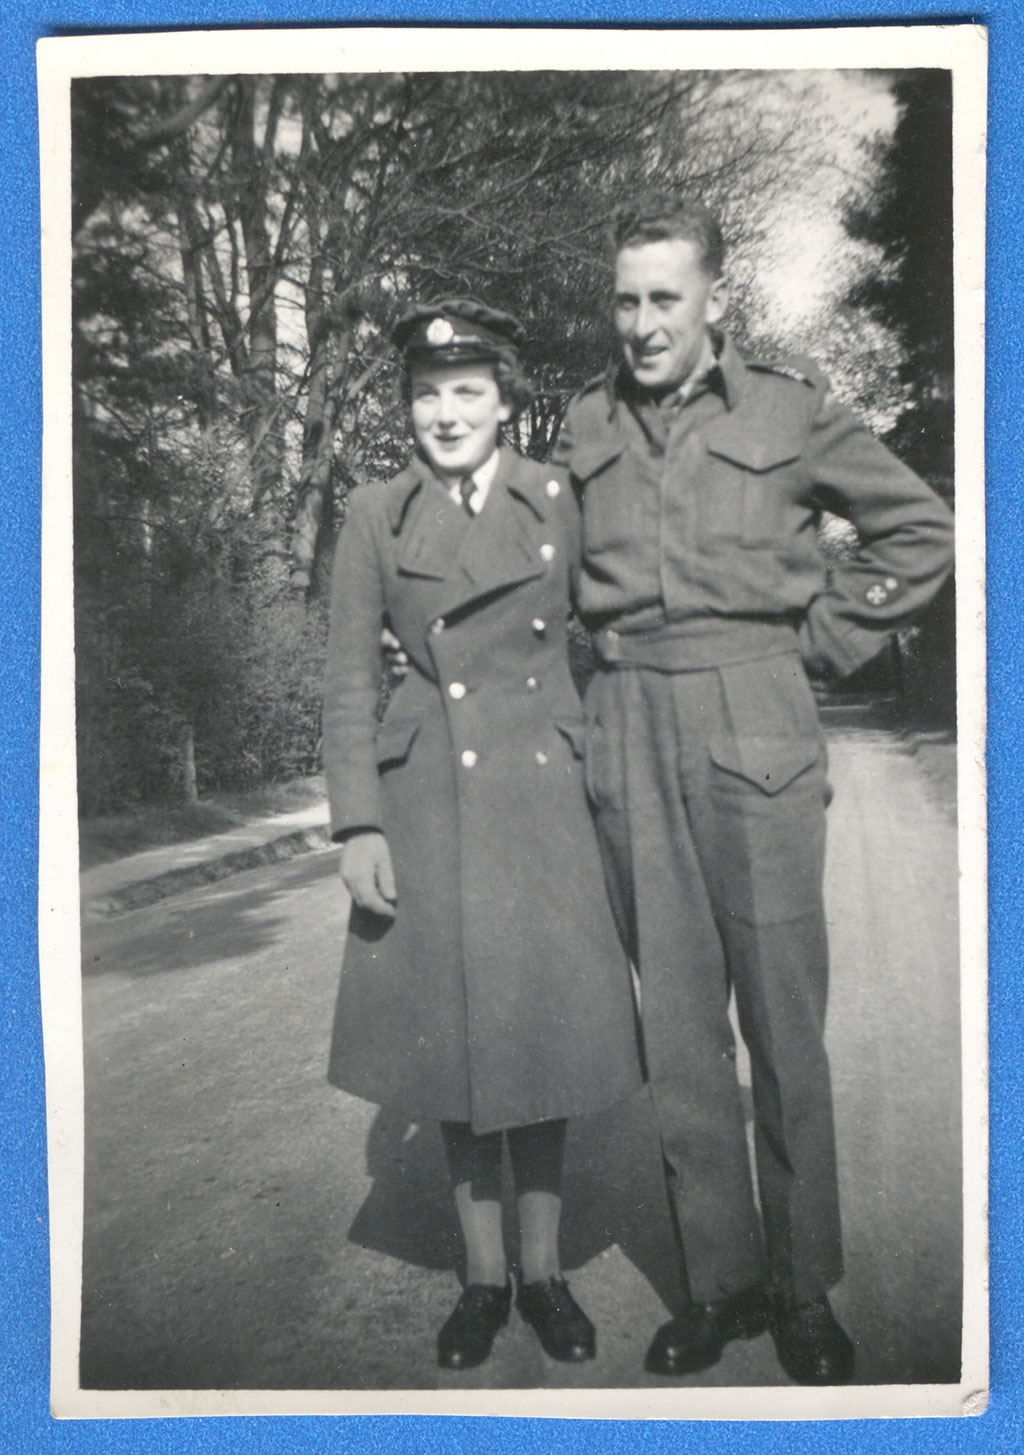 A man and woman wearing military uniform stand arm in arm on a dirt road.